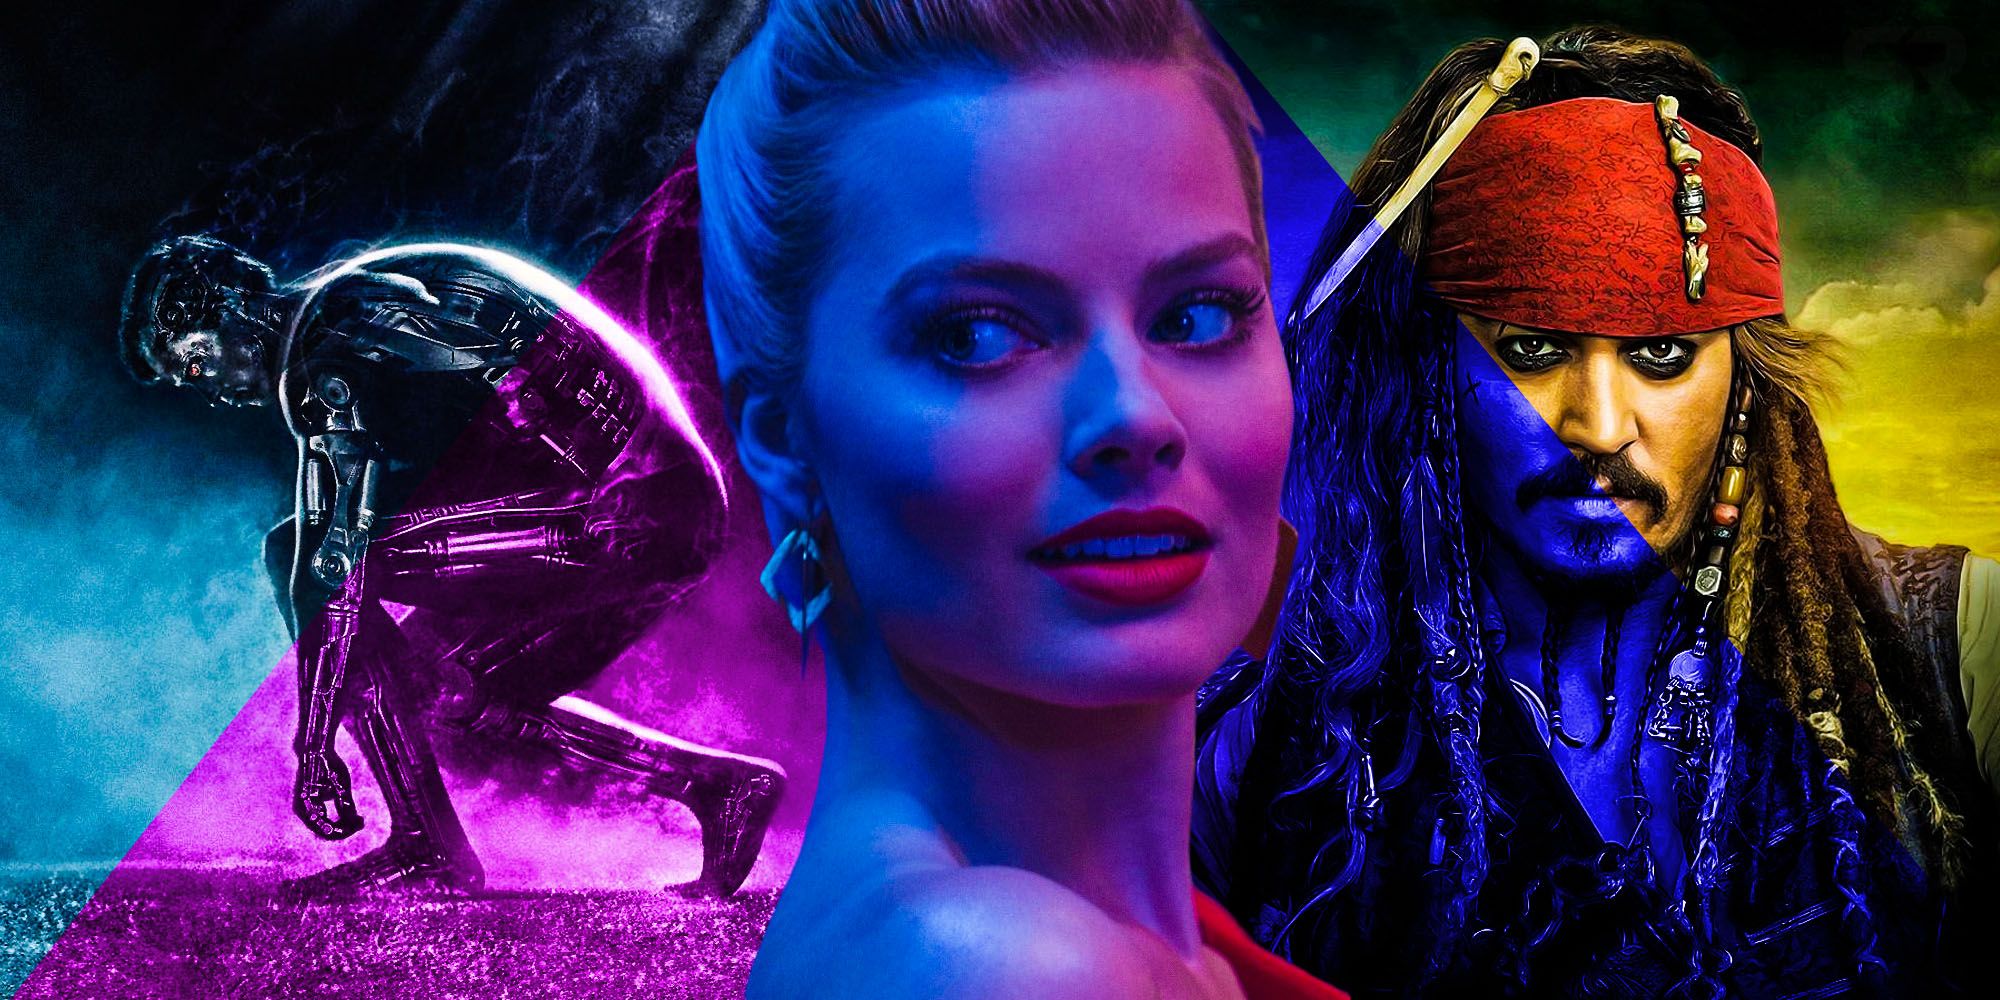 Why Terminator Is Better For Margot Robbie Than Pirates of the Caribbean